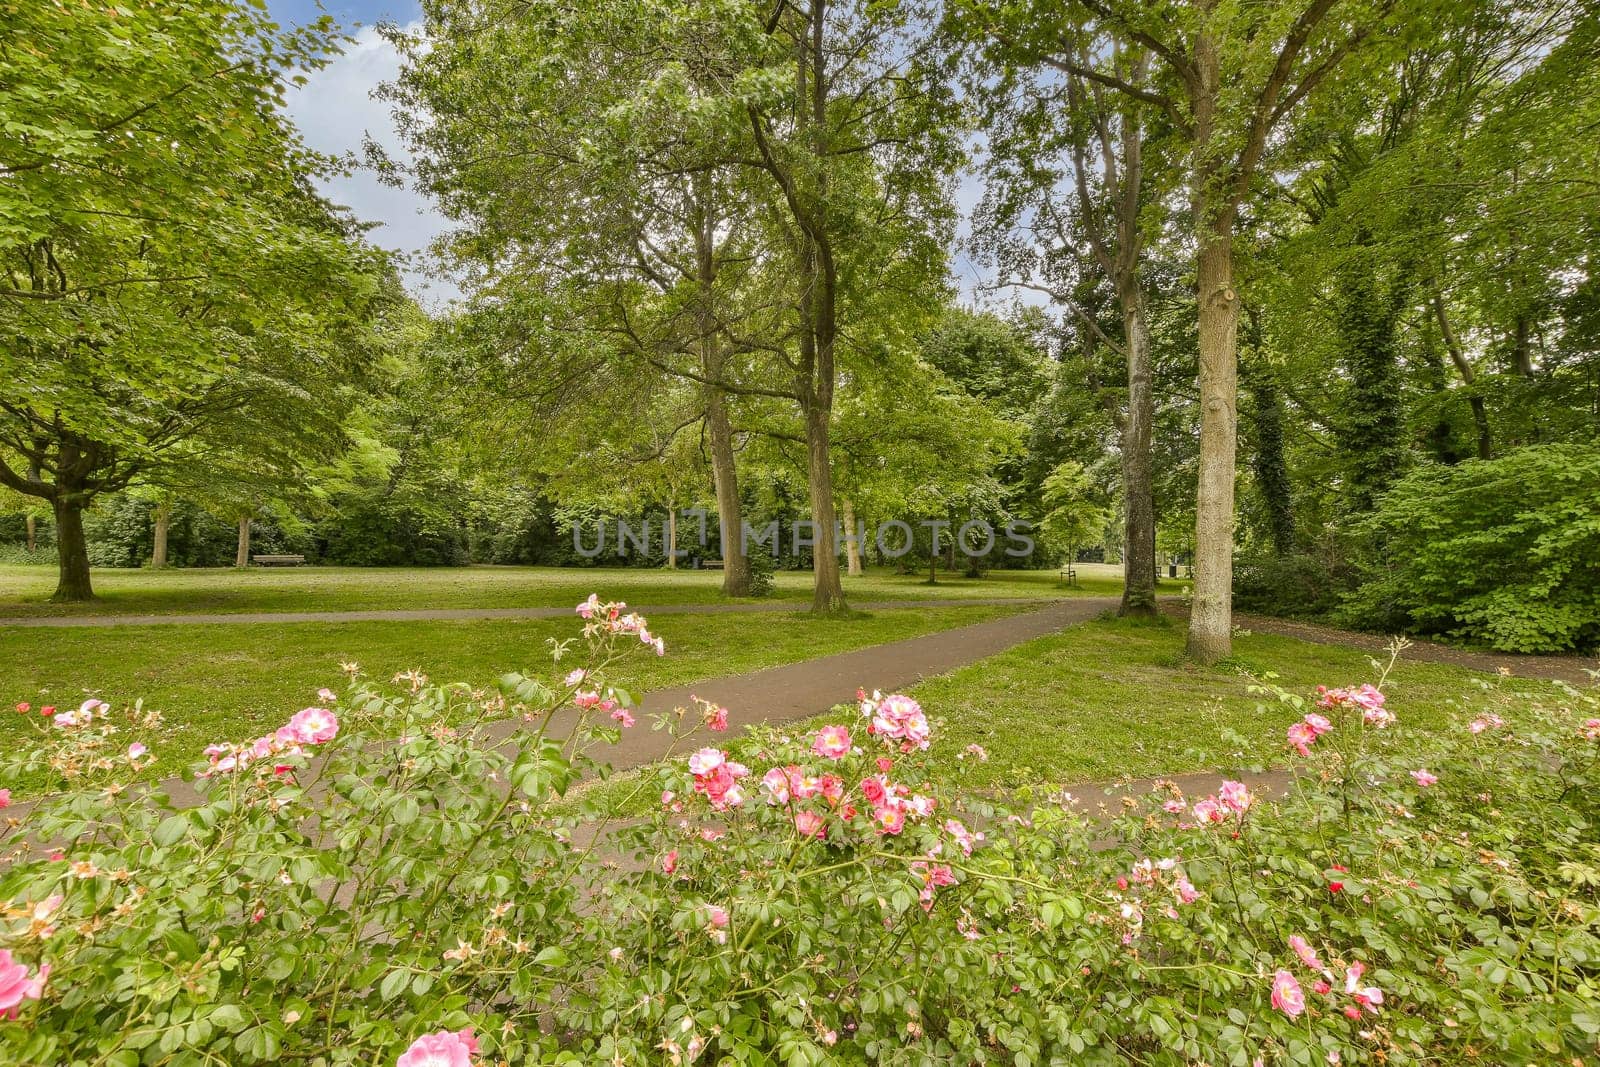 a path through a park with flowers in the foreground by casamedia